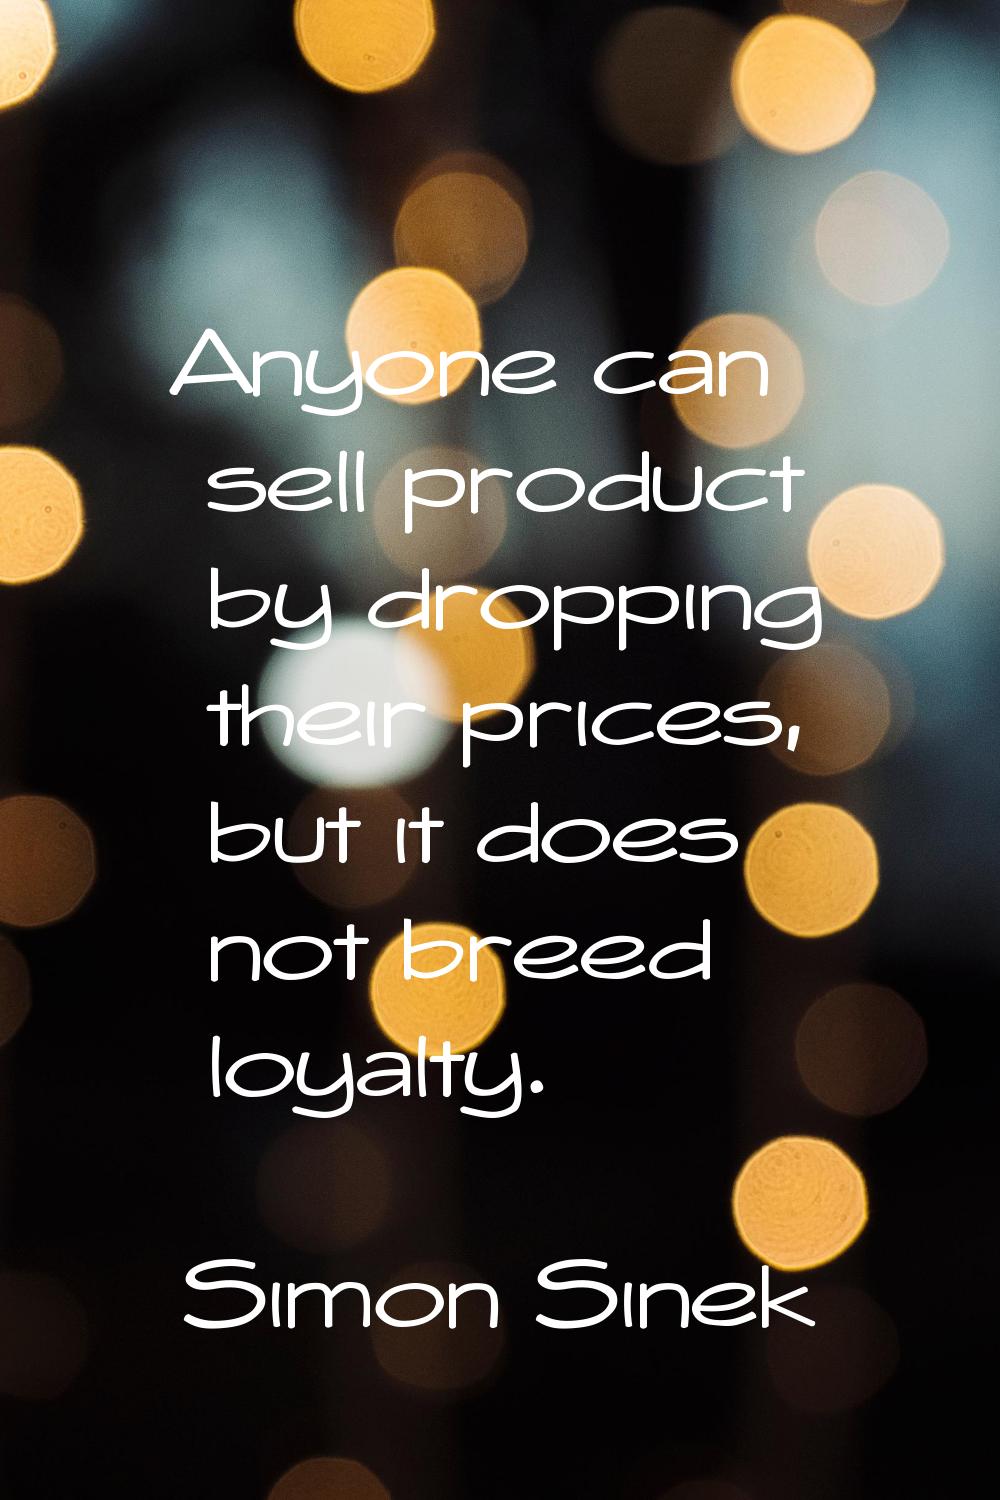 Anyone can sell product by dropping their prices, but it does not breed loyalty.